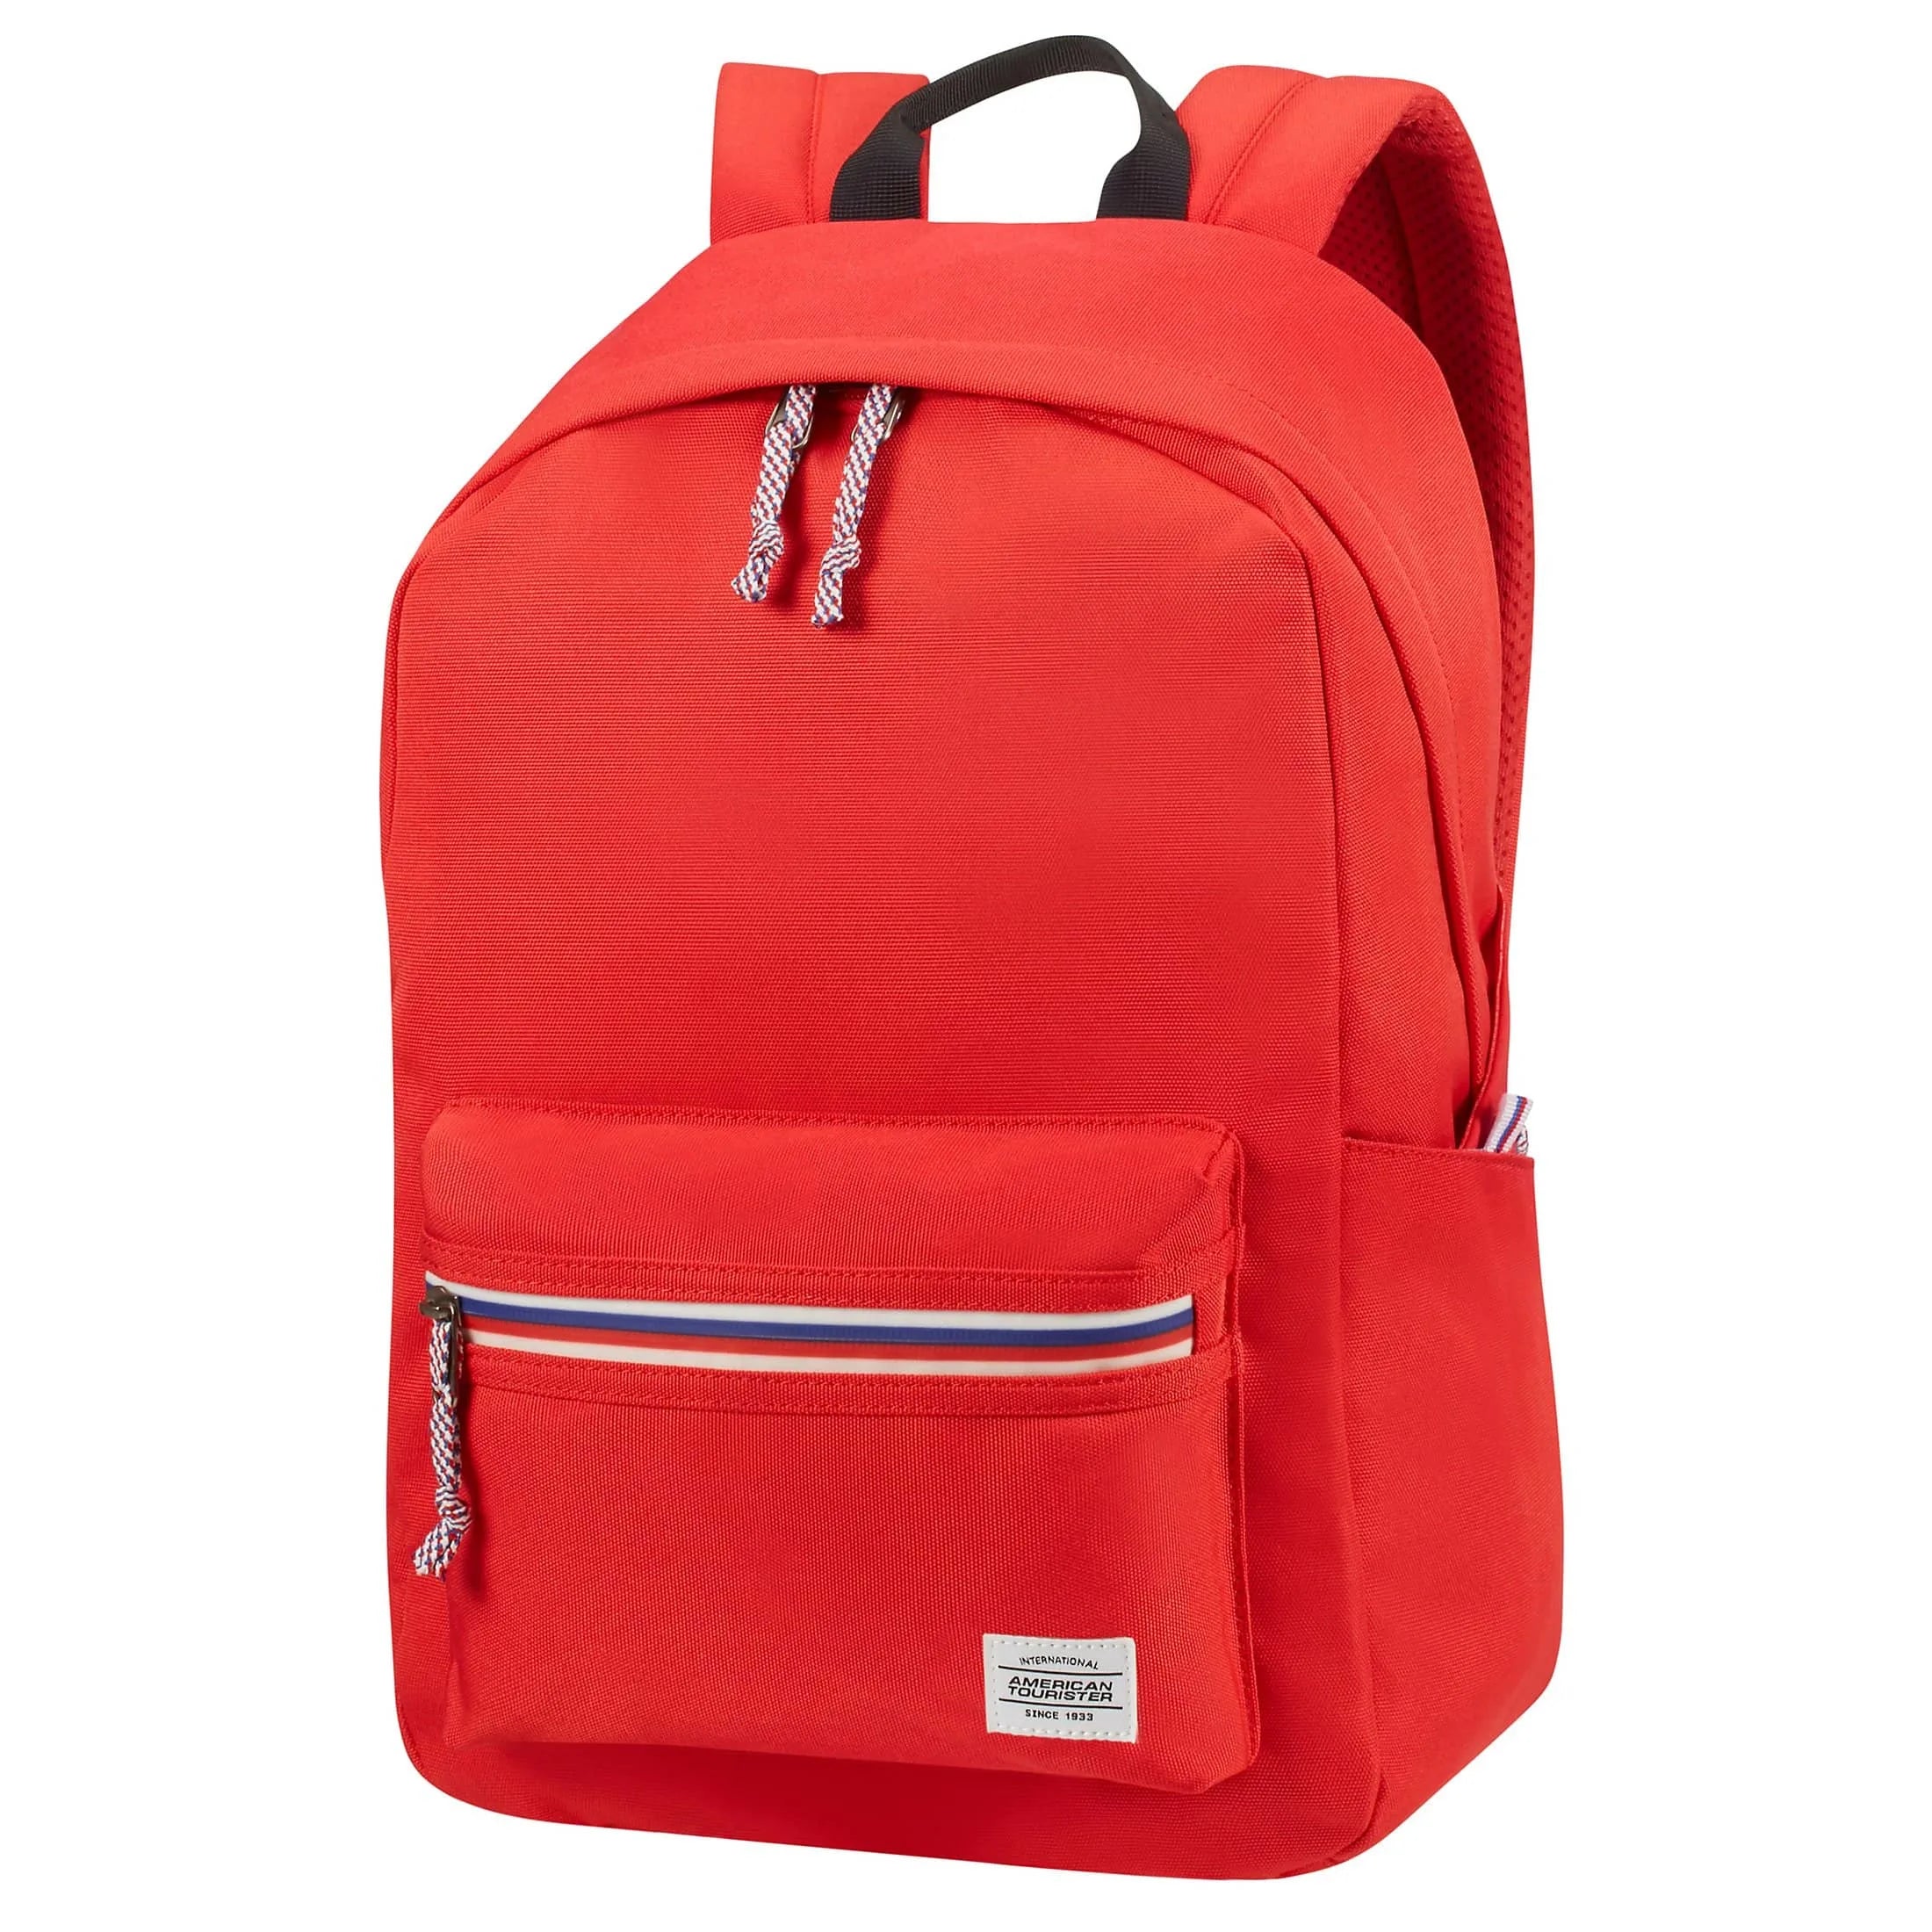 American Tourister Upbeat Leisure Sac à dos 42 cm - rouge